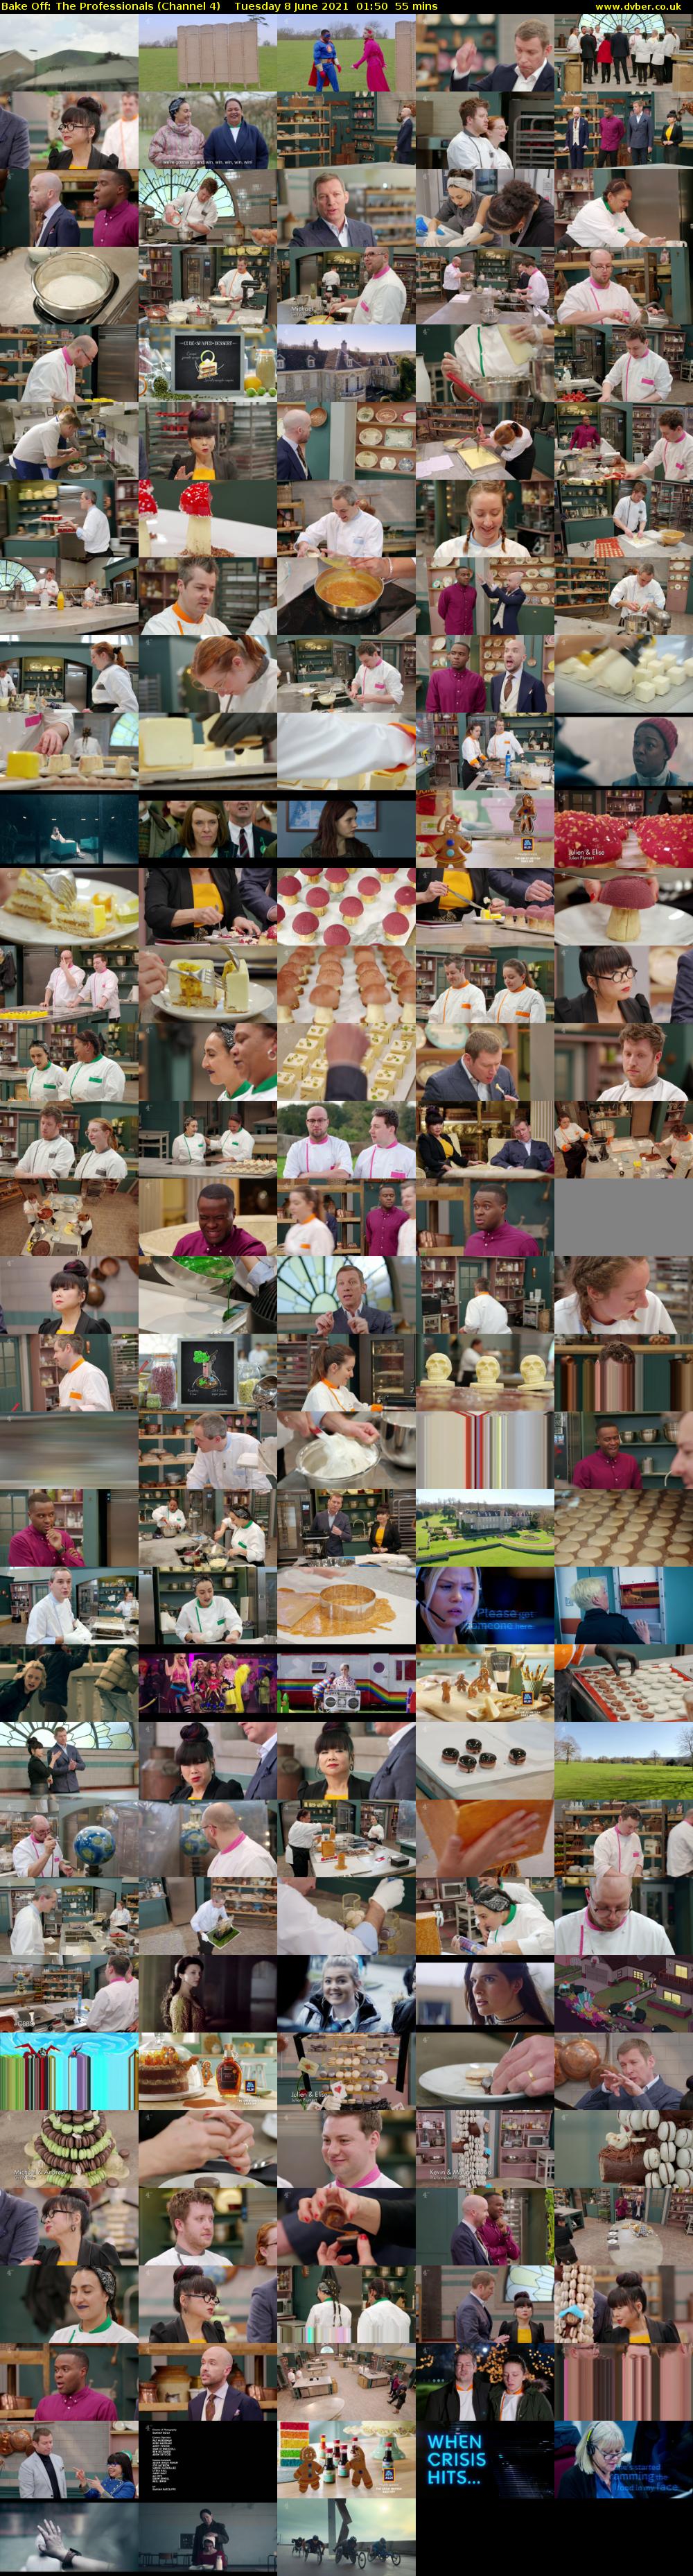 Bake Off: The Professionals (Channel 4) Tuesday 8 June 2021 01:50 - 02:45